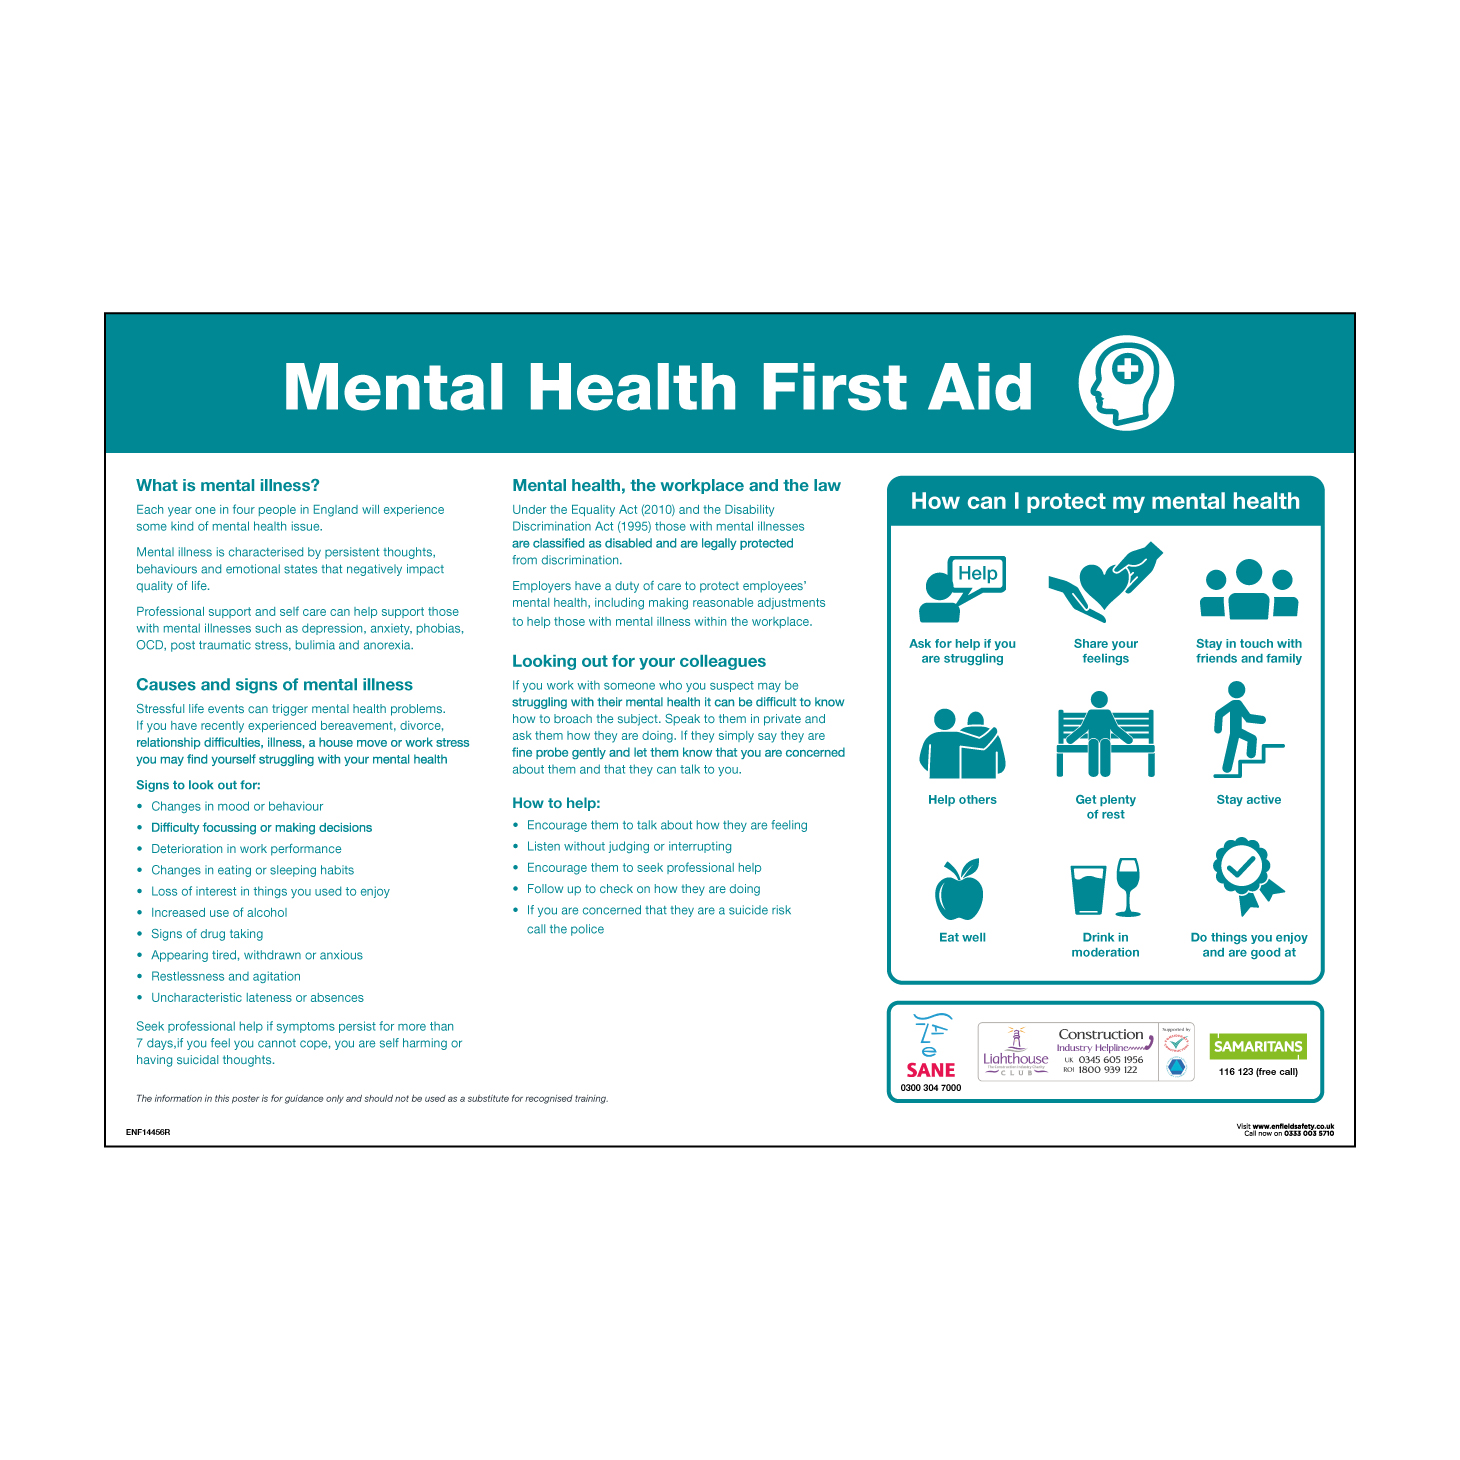 600 x 400mm 3mm Foamex - VARIOUS on WHITE - MENTAL HEALTH FIRST AID POSTER